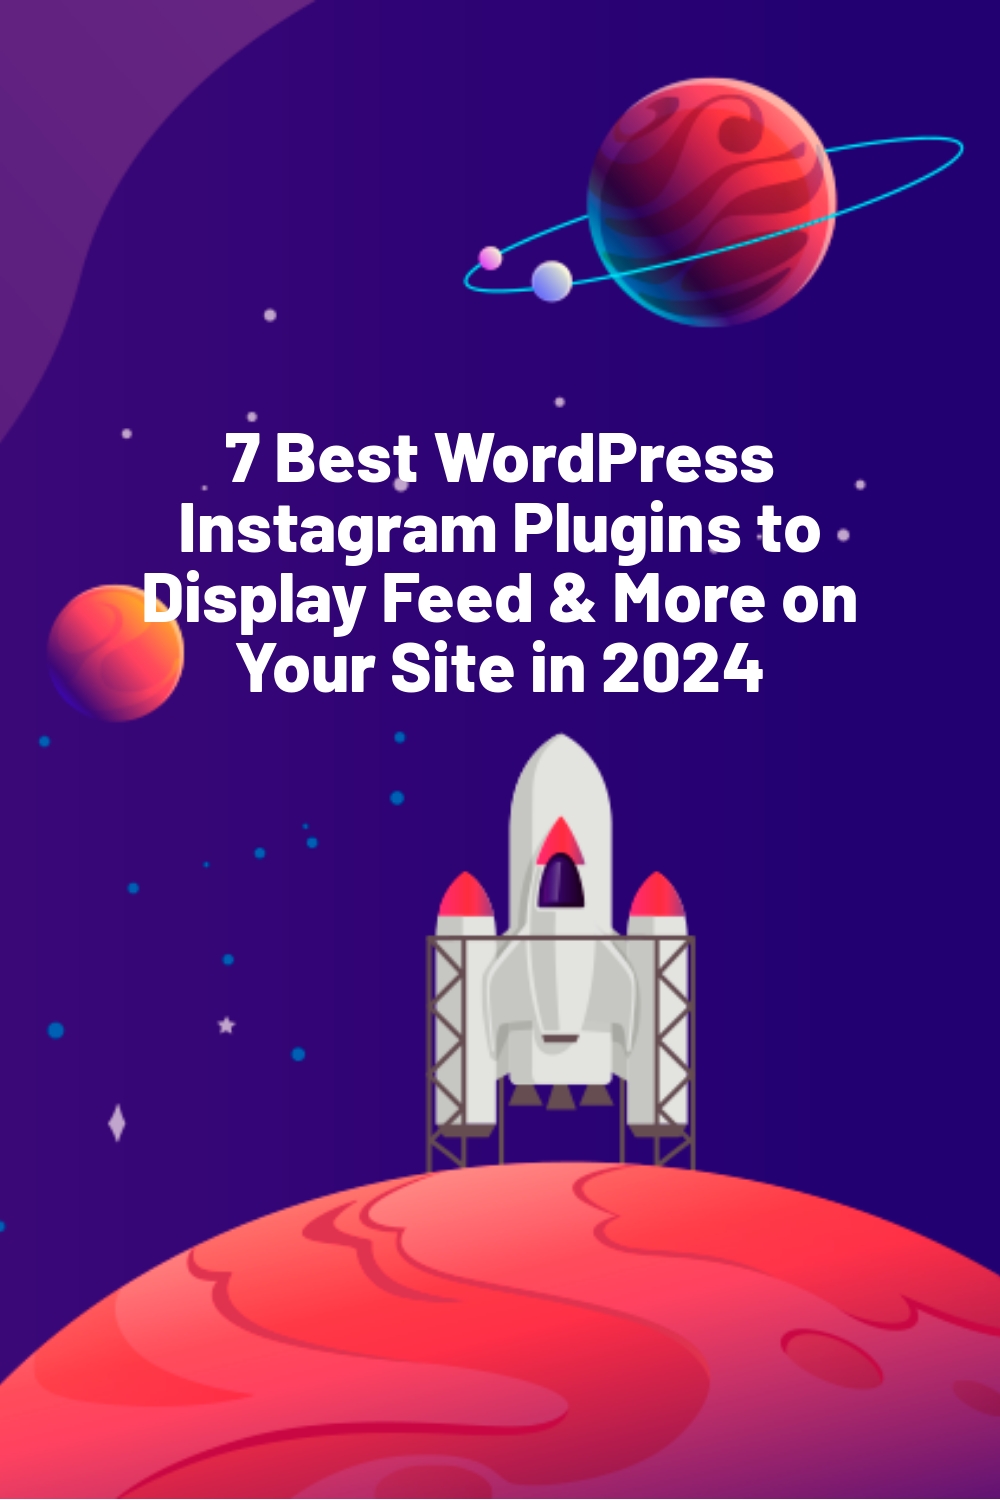 7 Best WordPress Instagram Plugins to Display Feed & More on Your Site in 2024